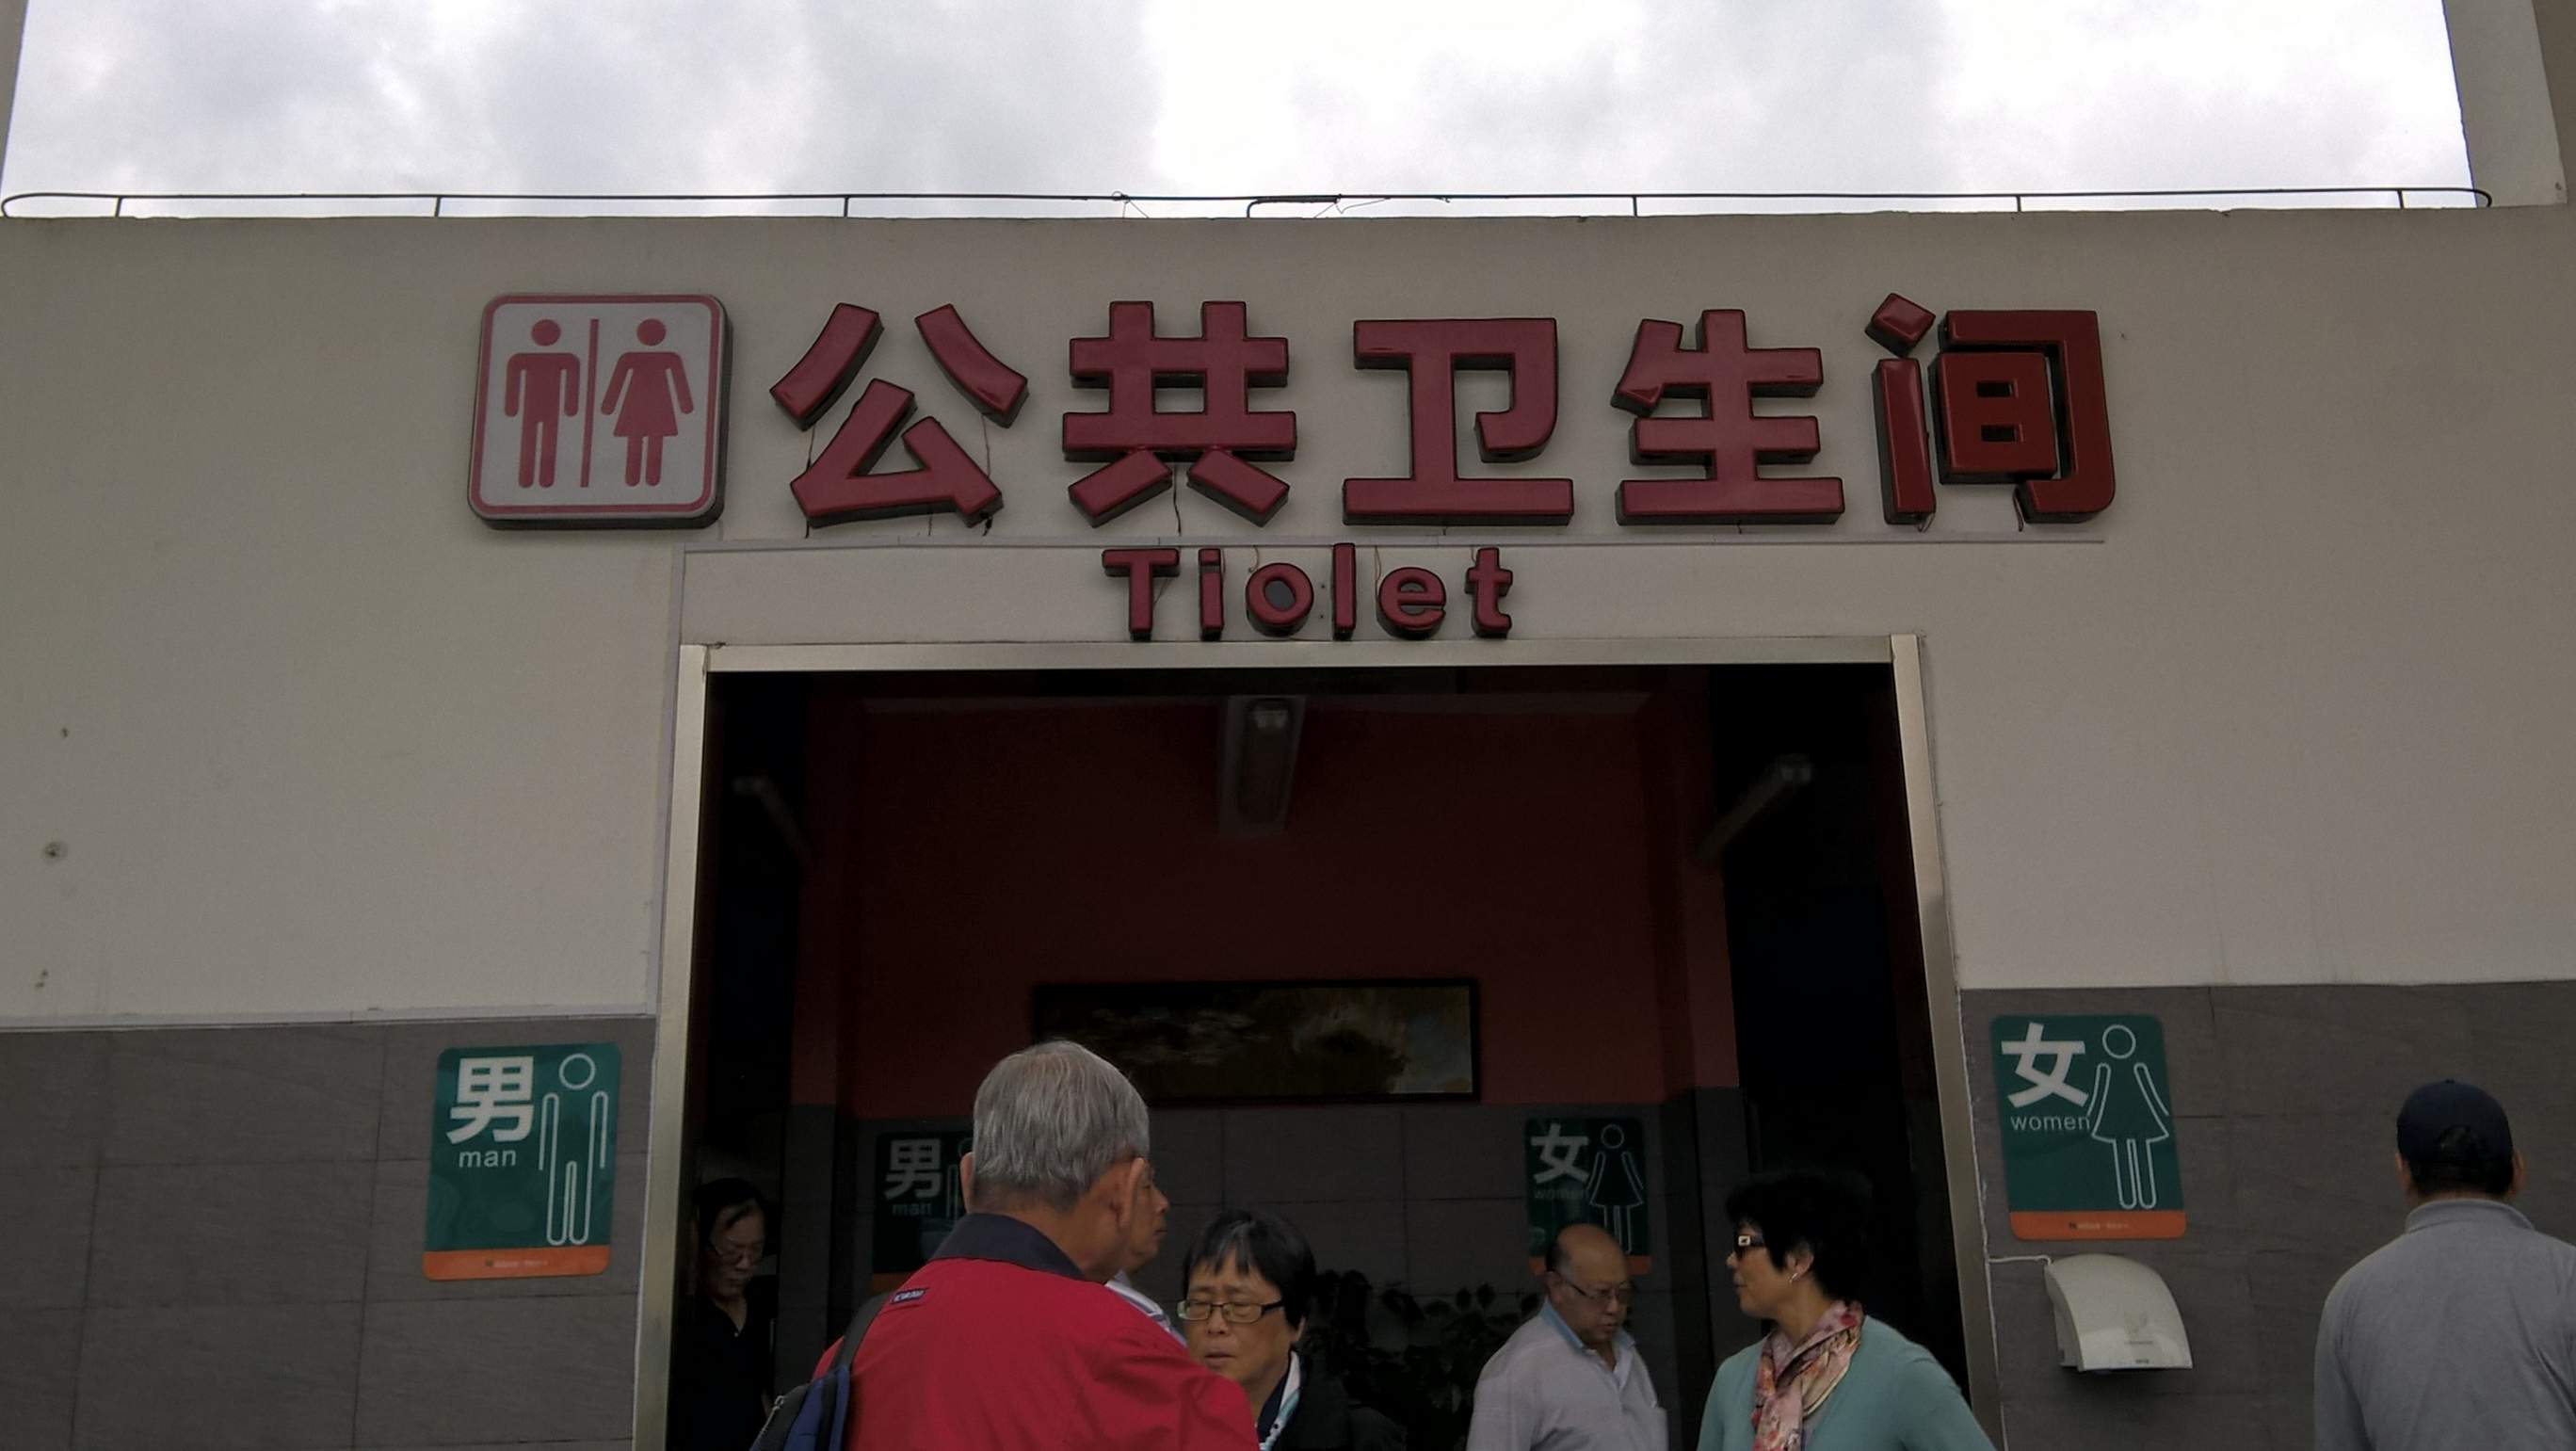 Tiolet sign, Chitou rest stop, China